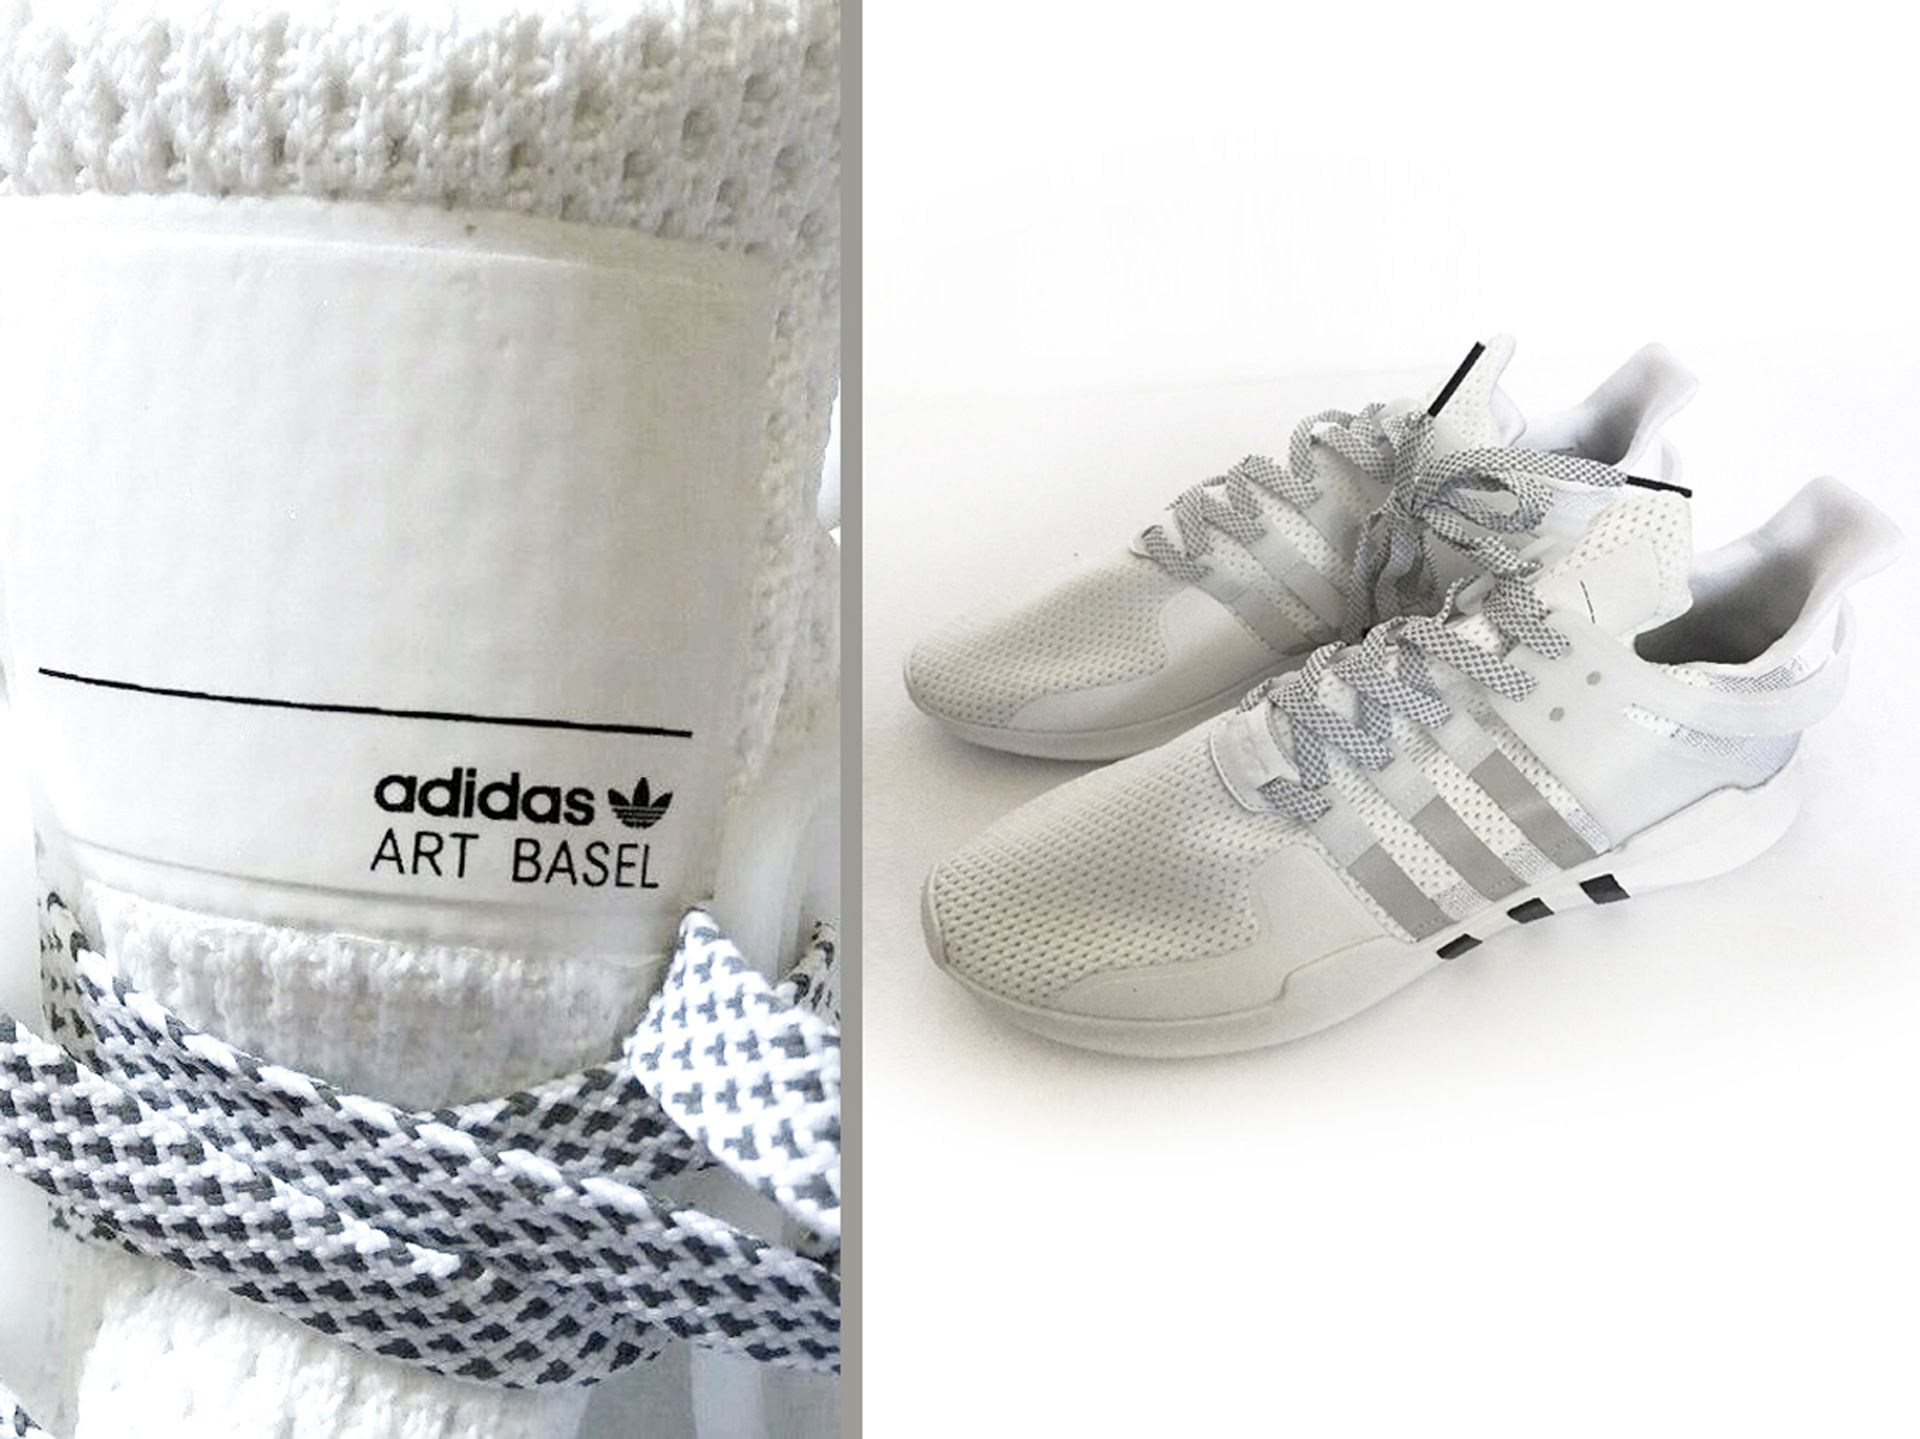 The limited-edition Adidas trainers with the Art Basel trademark were available on ebay last year Adidas